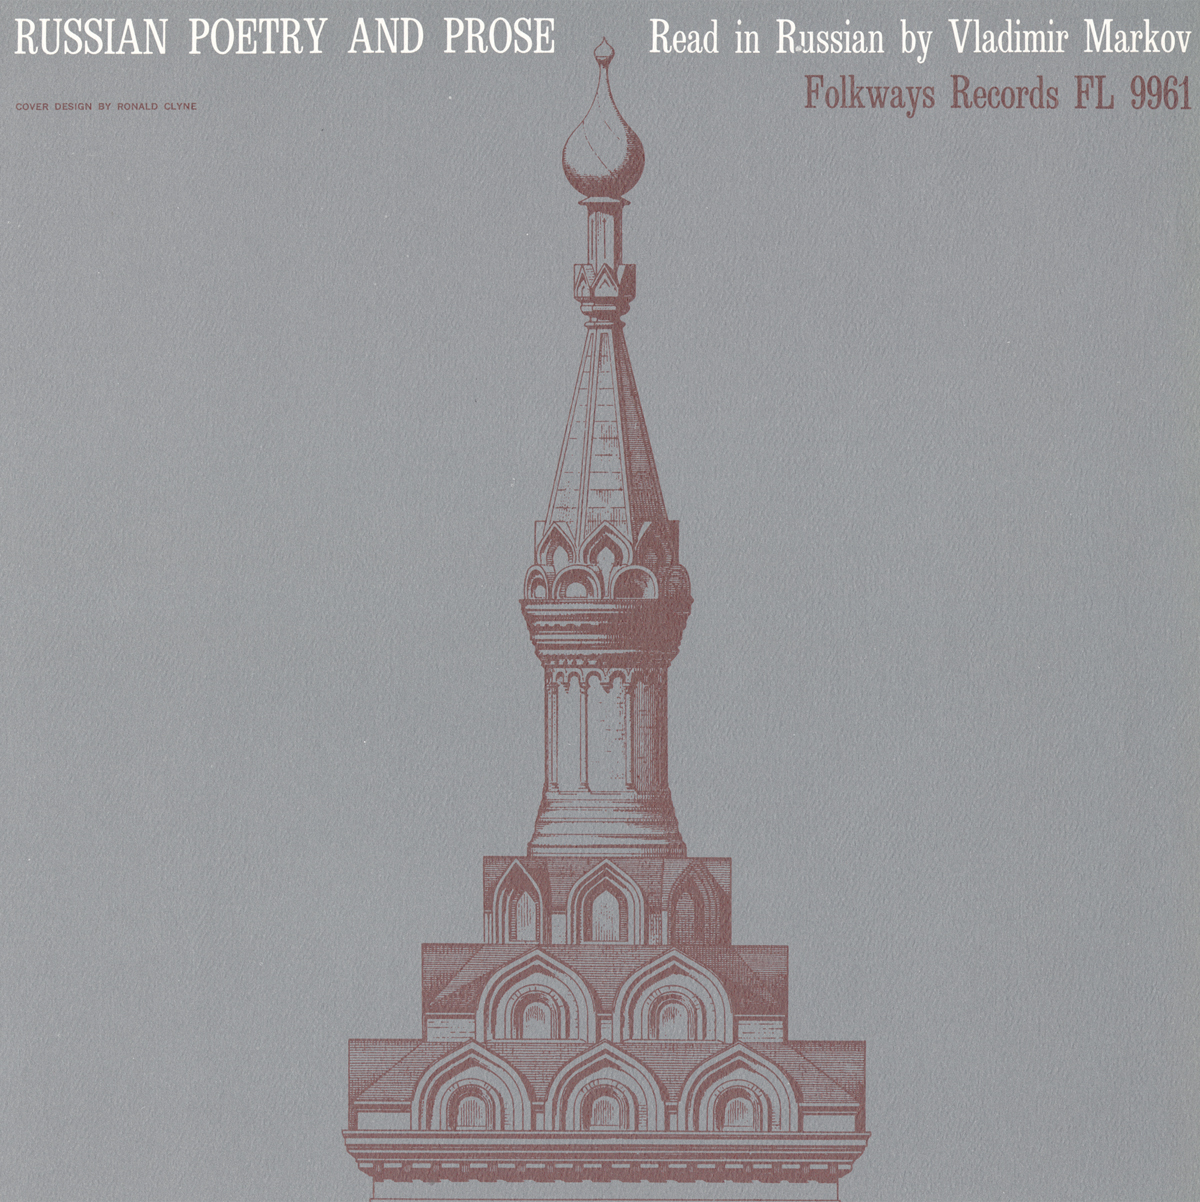 RUSSIAN POETRY AND PROSE